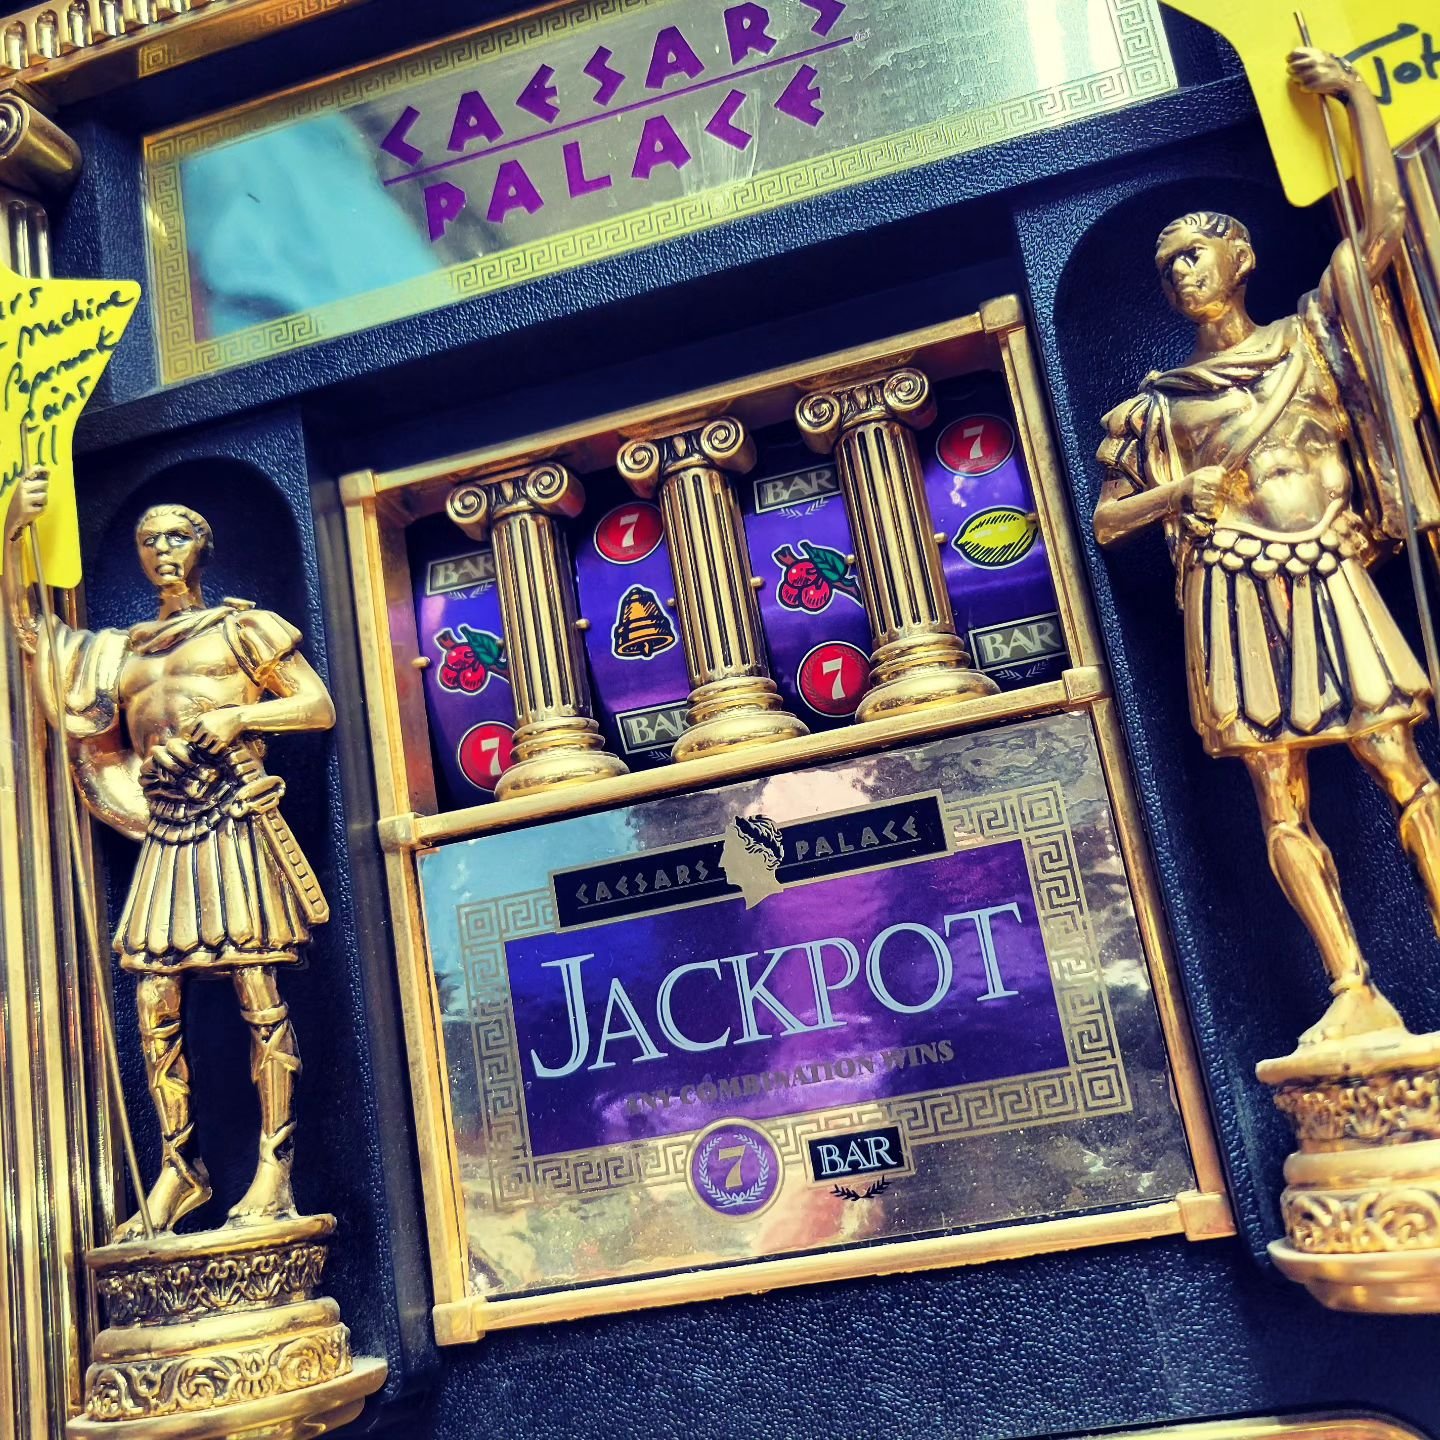 ✨️Now available✨️
This beautiful Caesars Palace slot machine issued by the Franklin Mint is ready for purchase! Call the store for more details or stop by.
#vegas #mainstreetpeddlers #franklinmint #caesarspalace #caesarsentertainment #vintagelasvegas